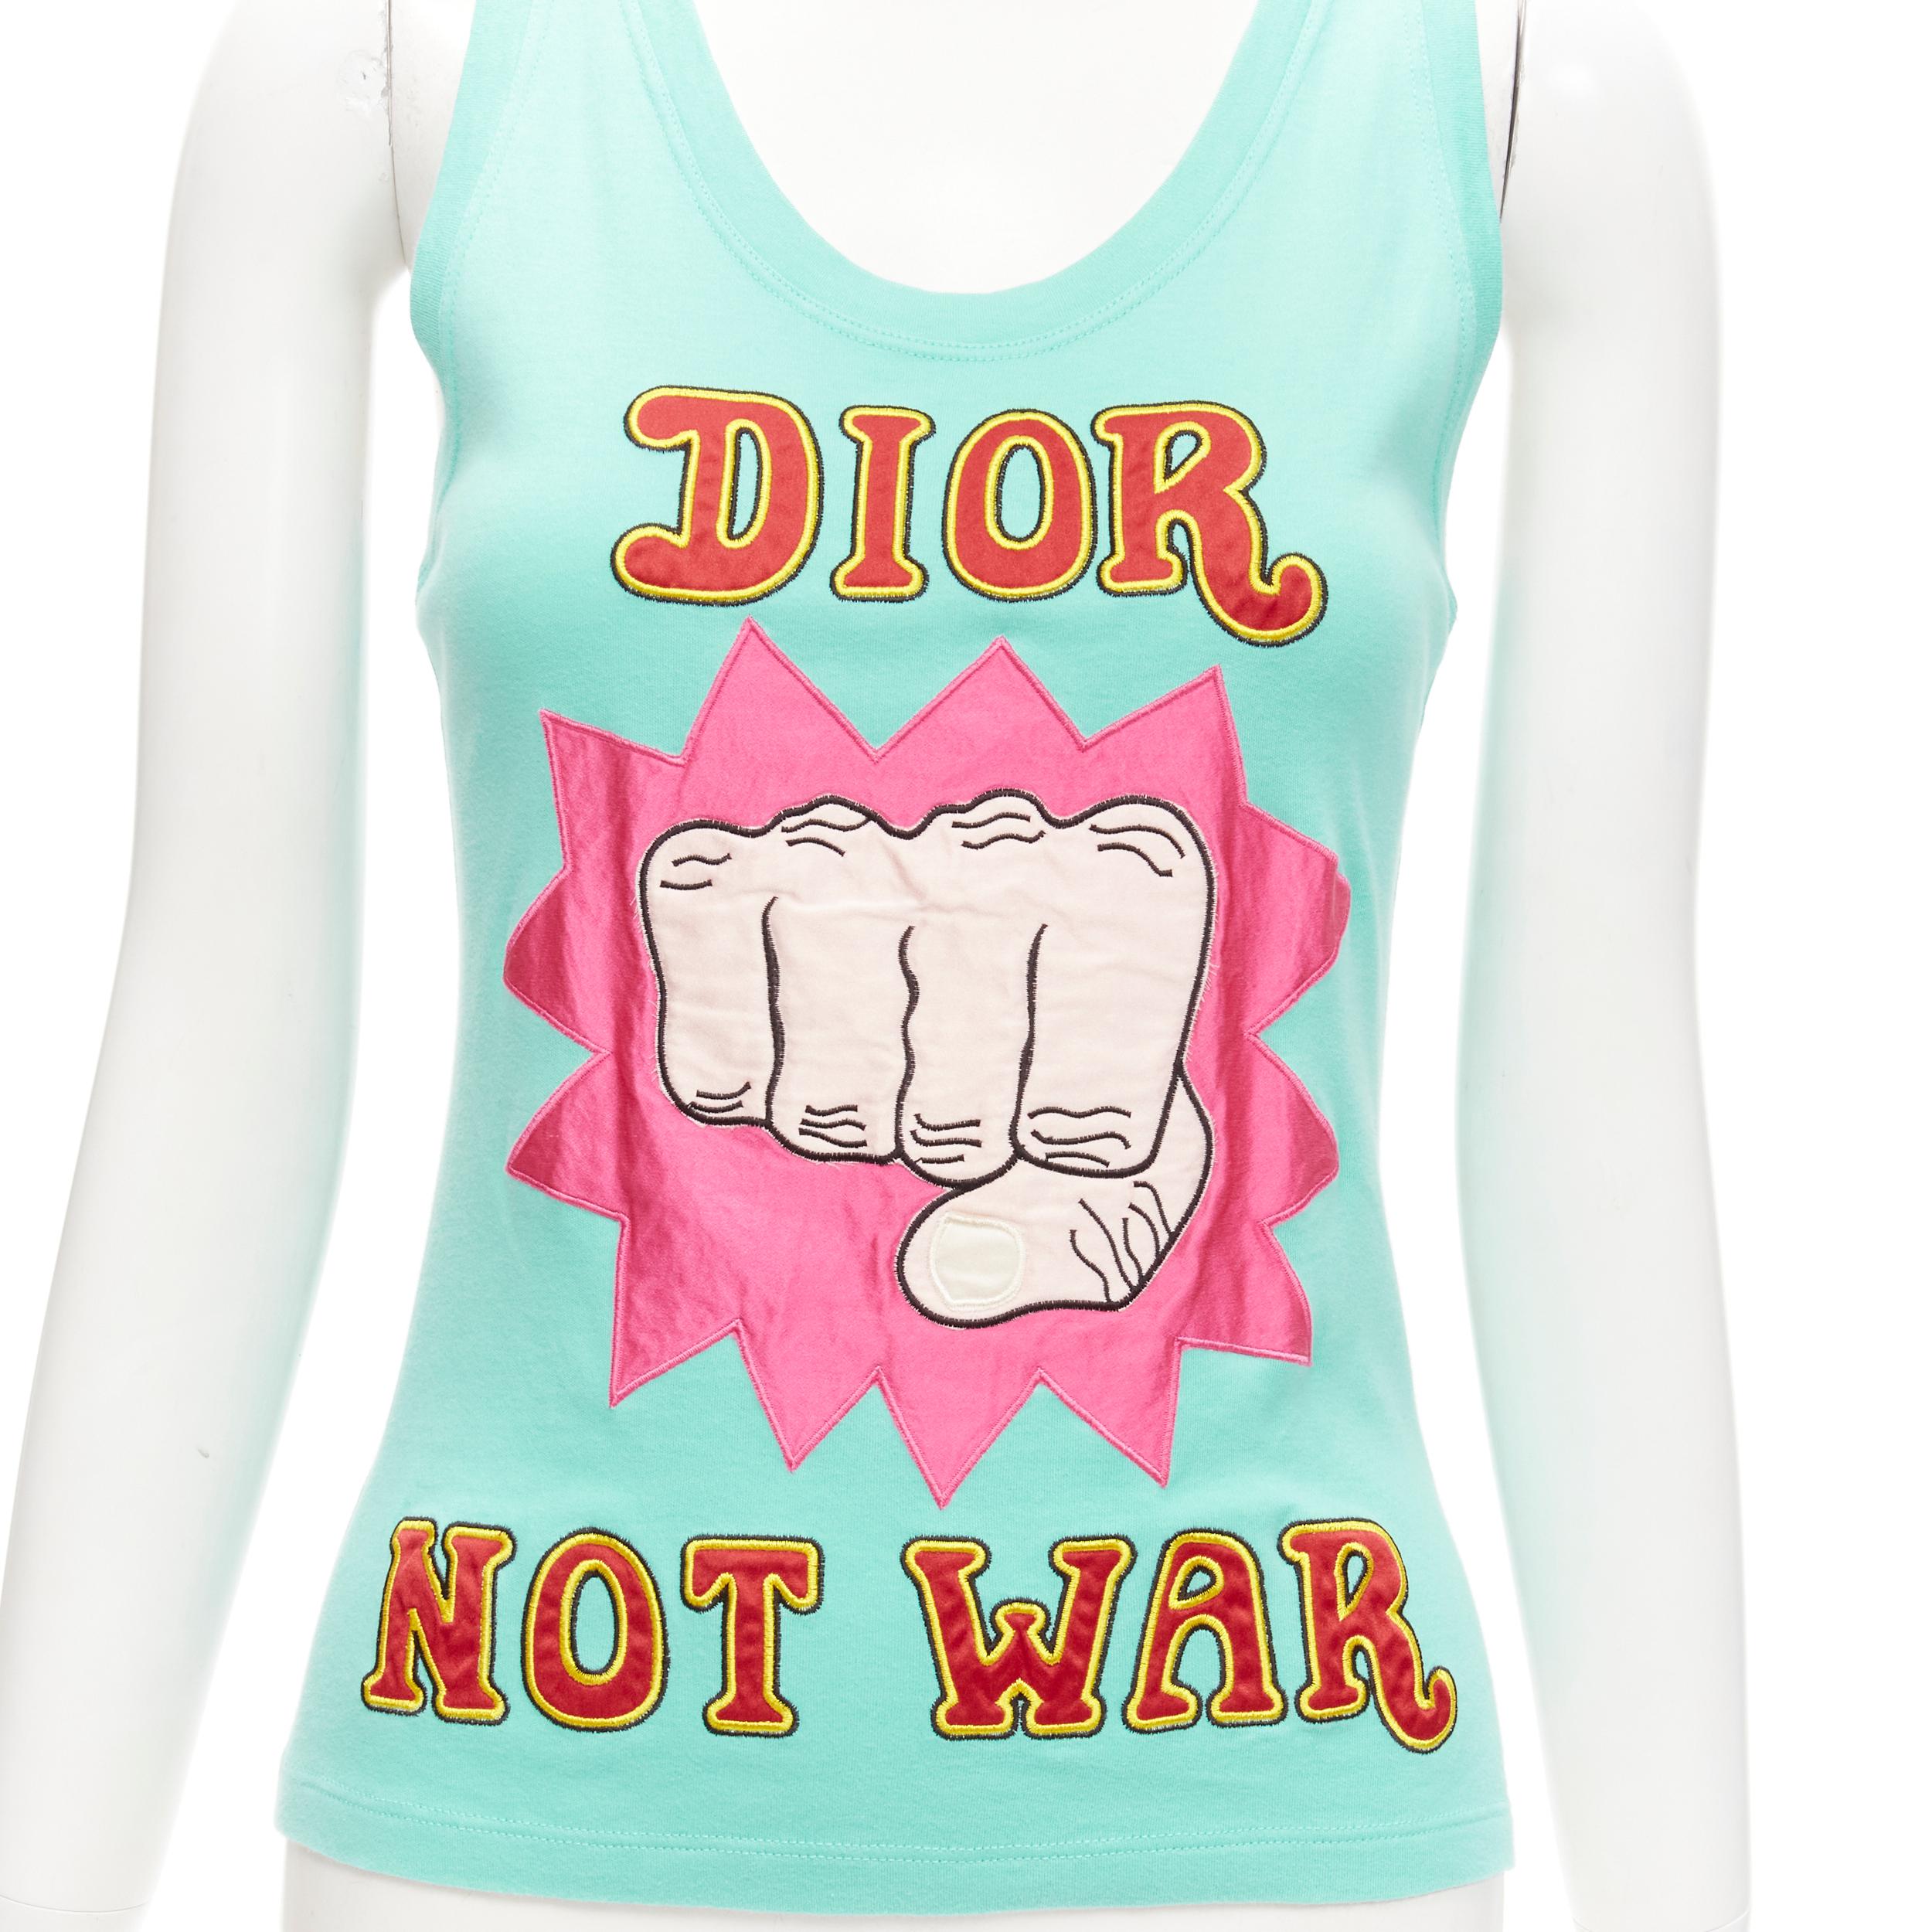 DIOR Galliano Runway 2005 Not War Propaganda print blue tank top FR38 M
Reference: TGAS/C01953
Brand: Christian Dior
Designer: John Galliano
Collection: Spring 2005 - Runway
Material: Cotton
Color: Blue, Pink
Pattern: Abstract
Closure: